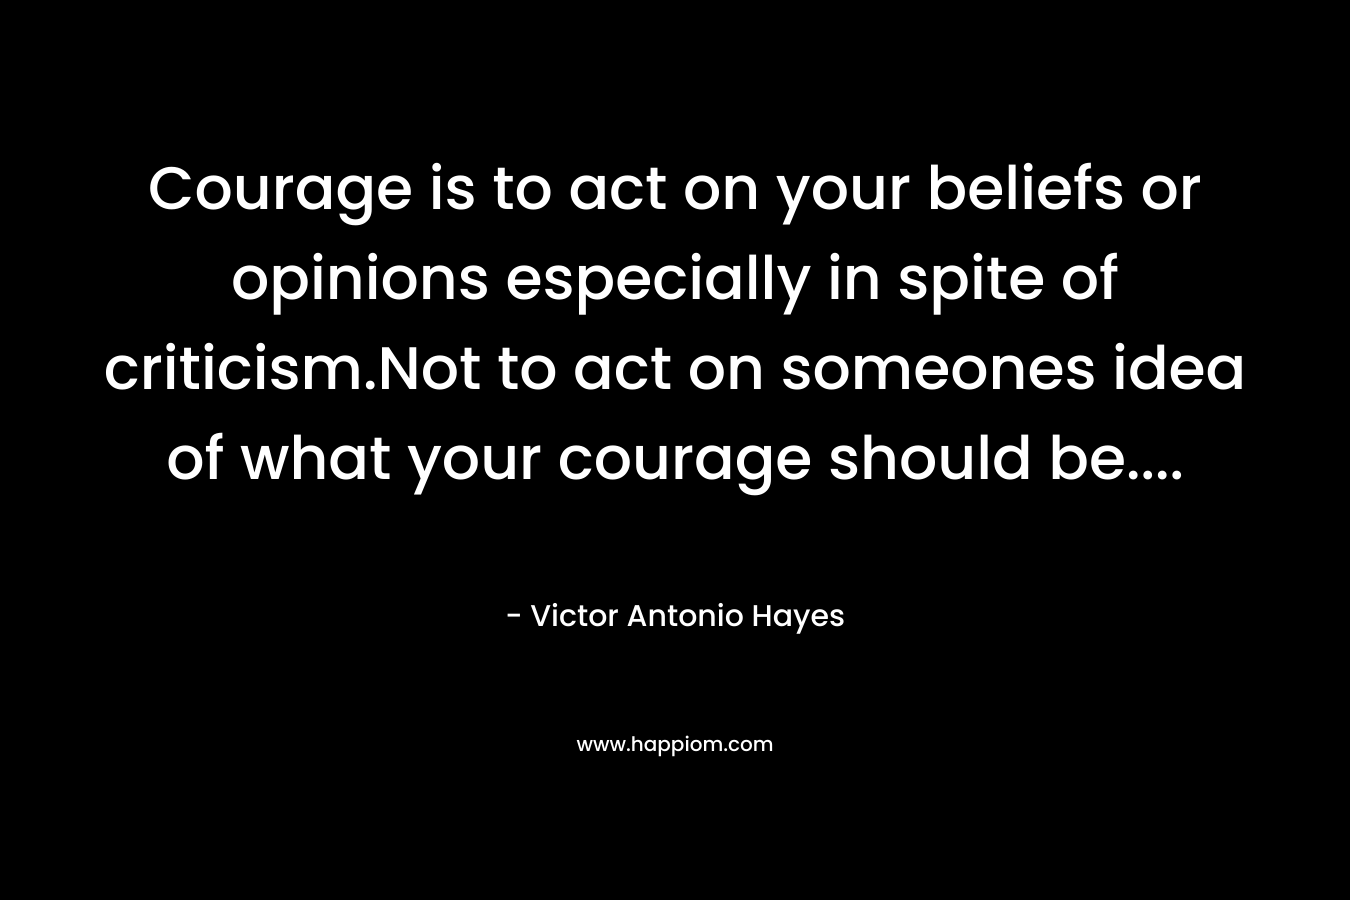 Courage is to act on your beliefs or opinions especially in spite of criticism.Not to act on someones idea of what your courage should be....